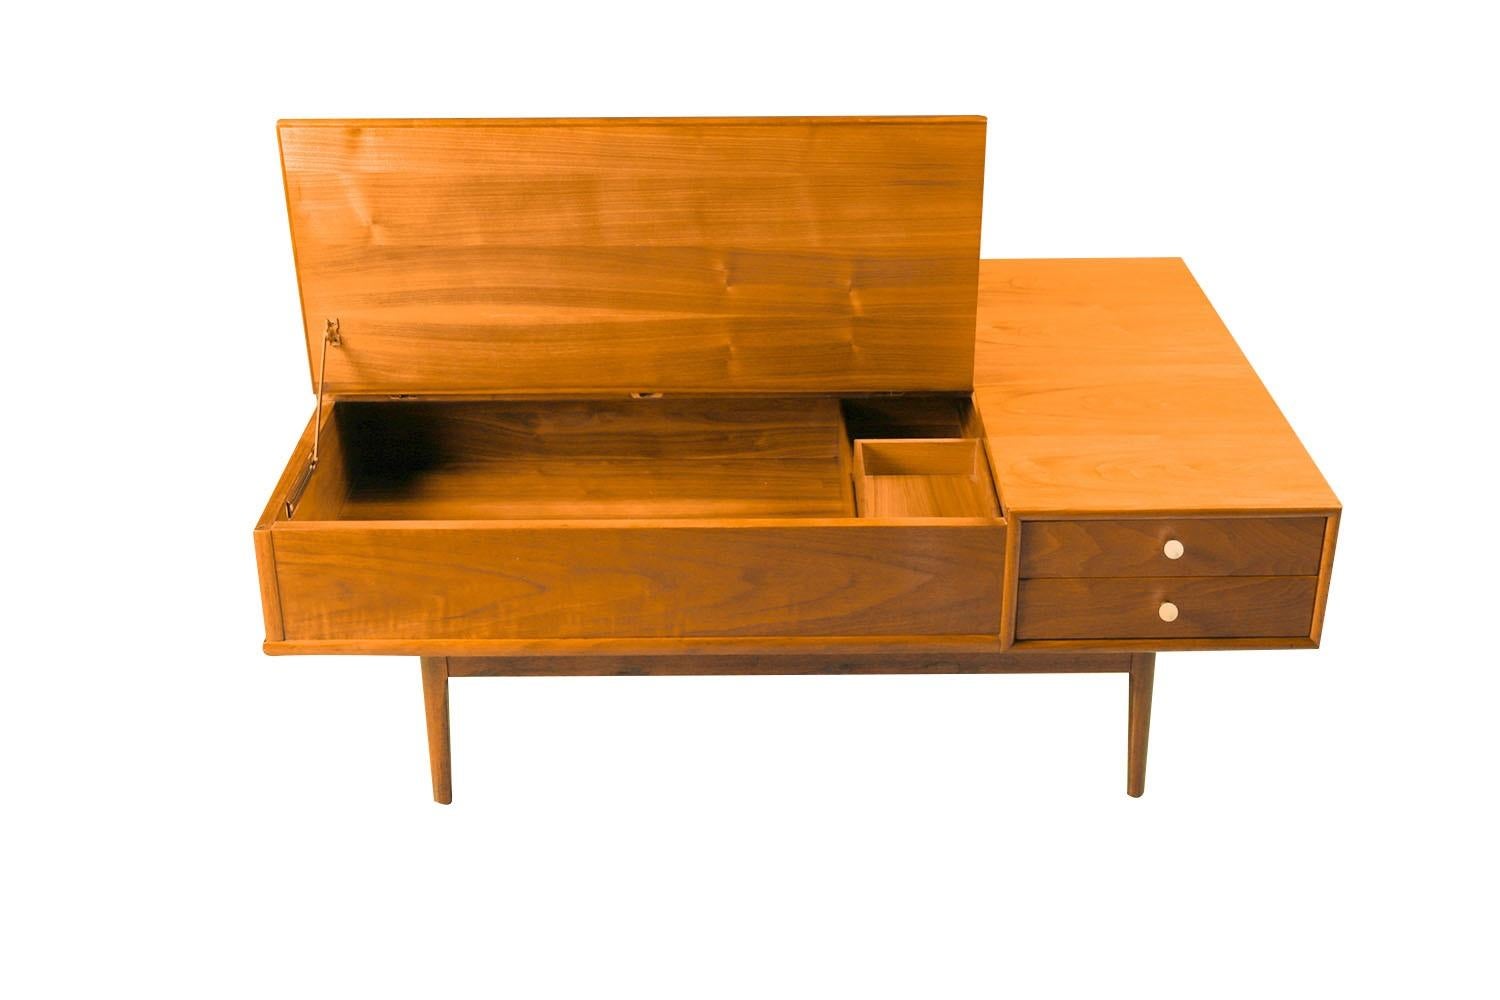 Fabulous Mid-Century Modern coffee table designed by Kipp Stewart and Stewart MacDougall for Drexel’s Declaration Collection, circa 1960s. Featuring a rectangular top in beautifully grained walnut wood above two drawers on the right, each drawer is